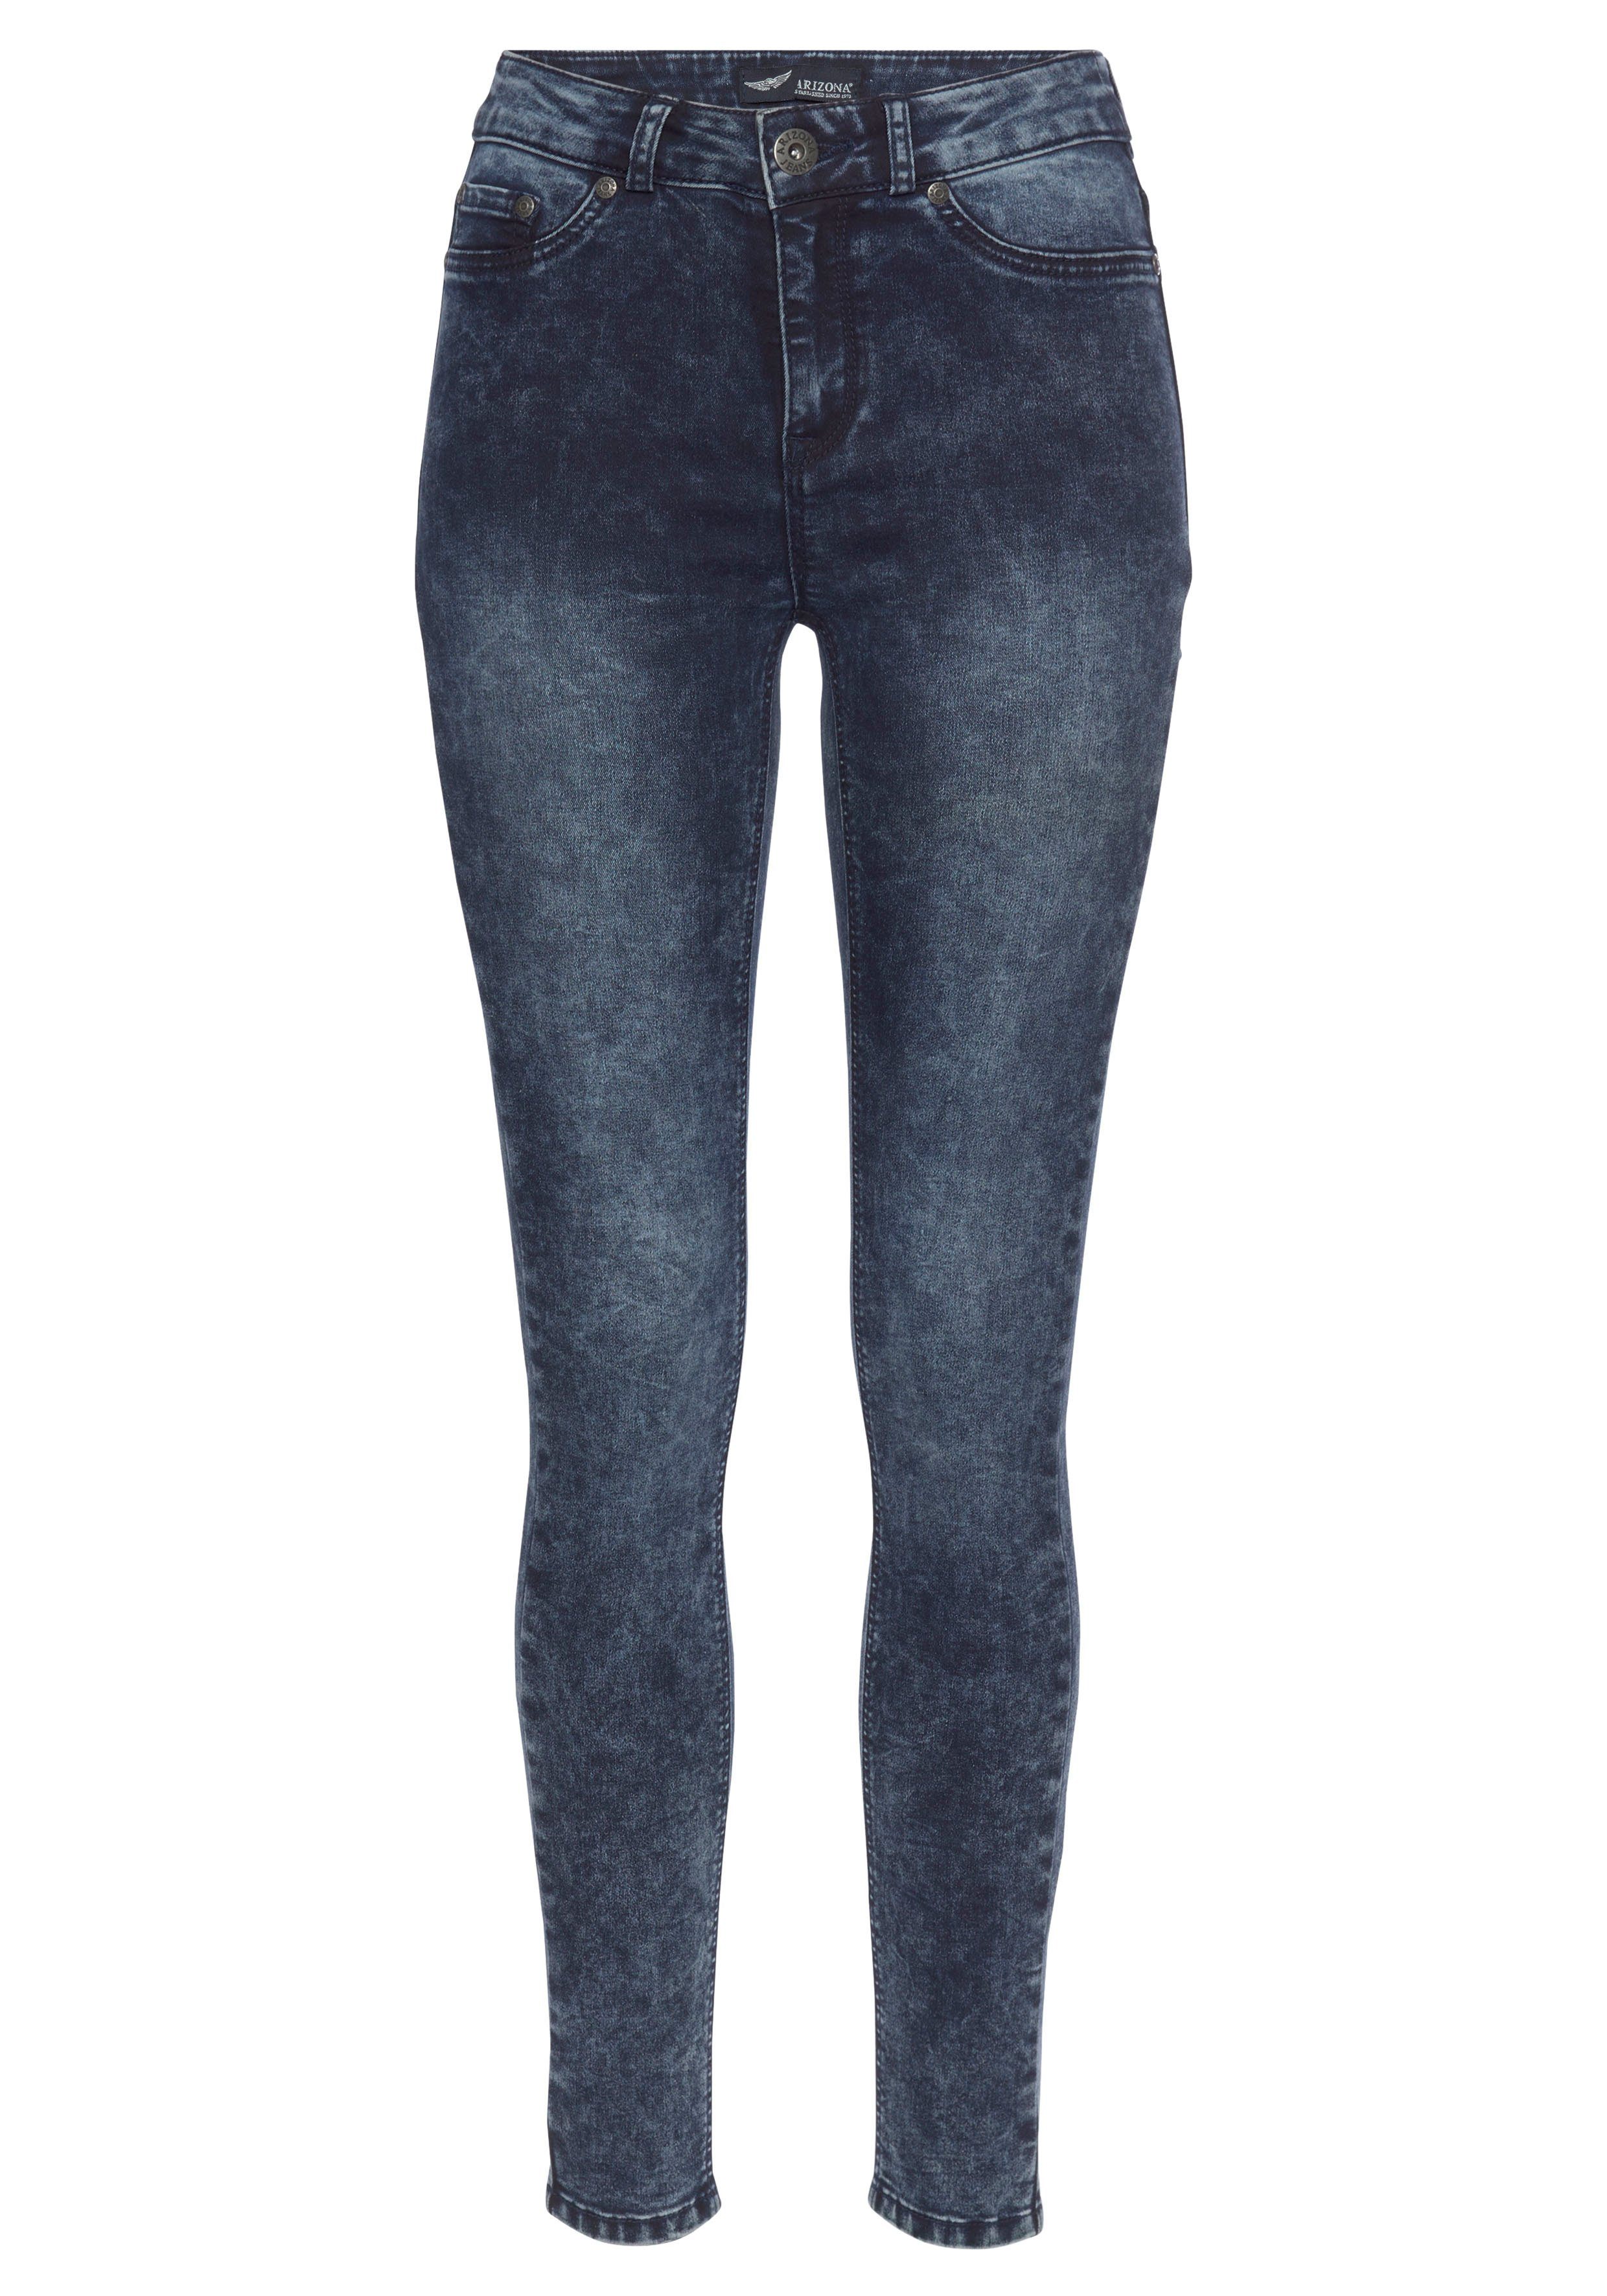 moon Arizona Stretch Skinny-fit-Jeans Jeans washed Moonwashed darkblue-moonwashed Ultra